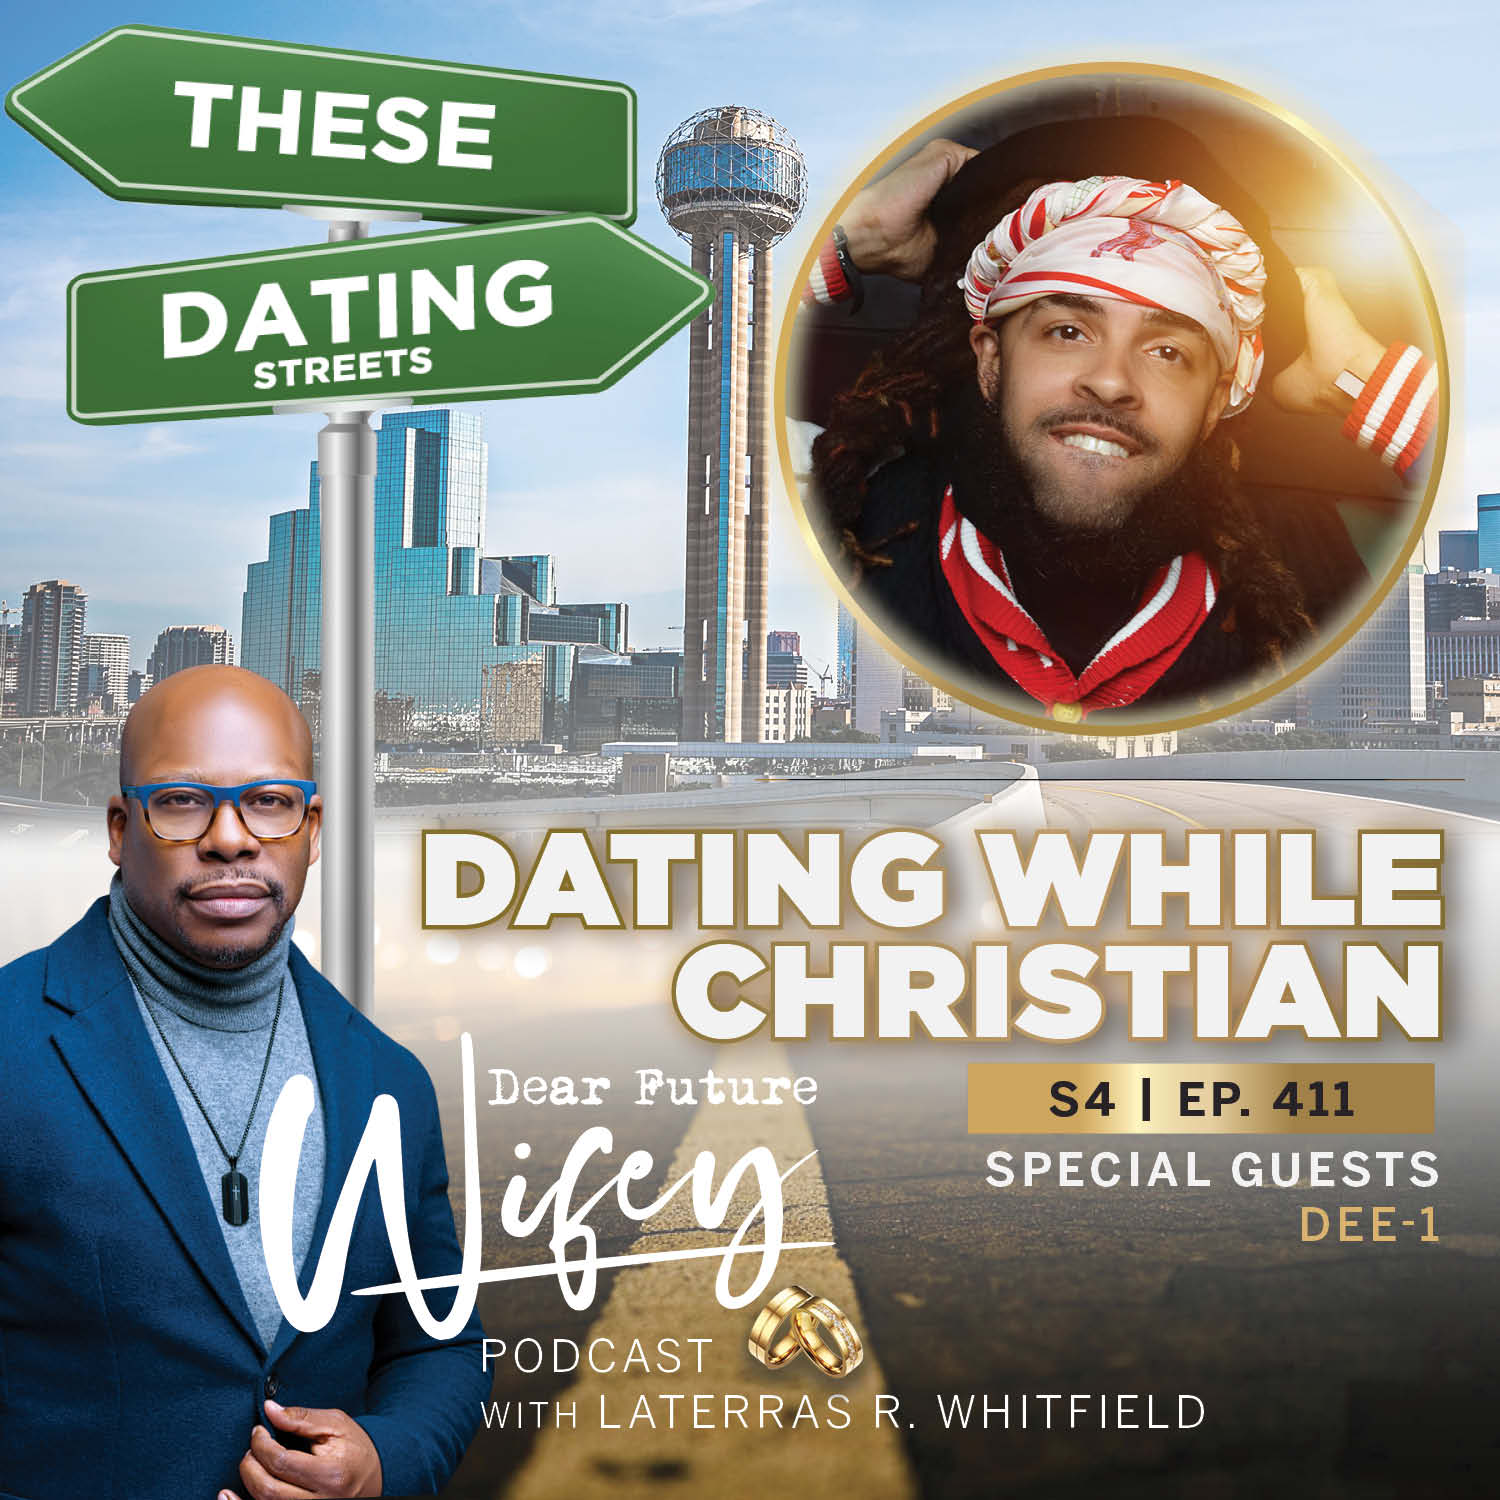 Dating While Christian (Guest: Dee-1)